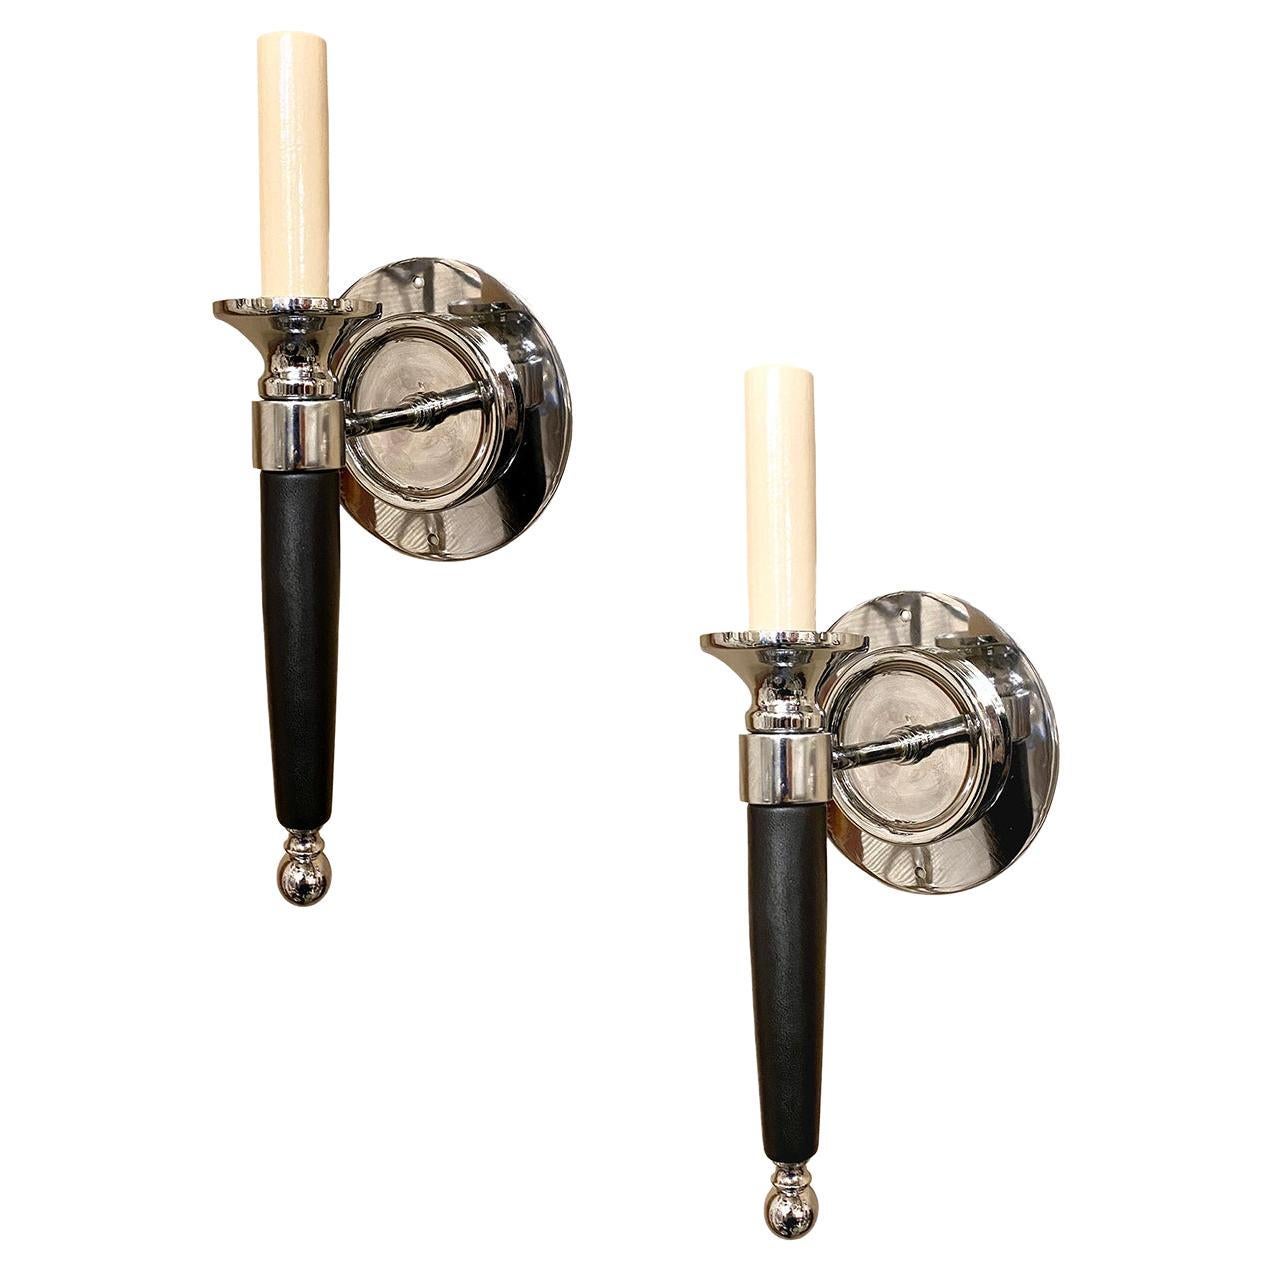 Set of 4 Silver-Plated and Leather Sconces